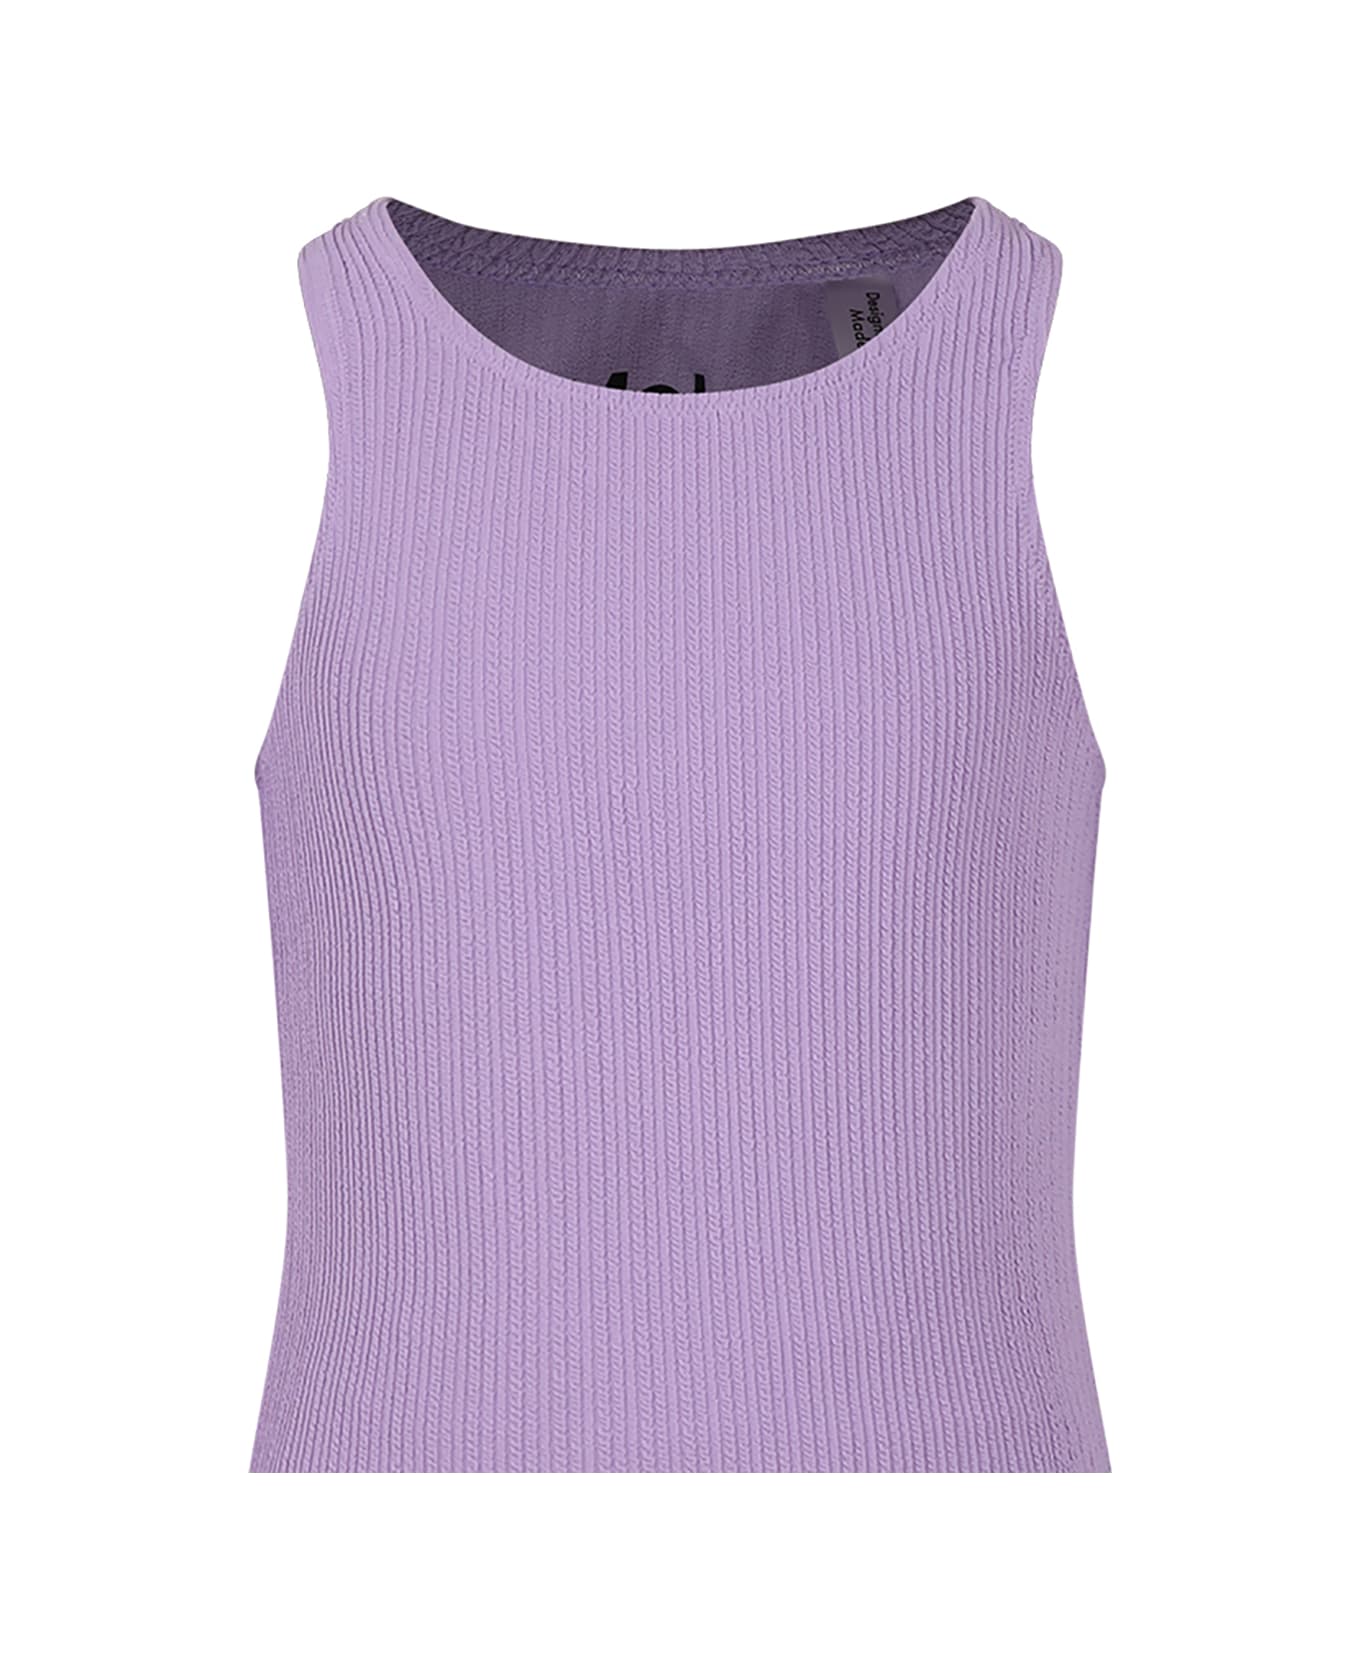 Molo Purple Beach Cover-up For Girl - Violet ワンピース＆ドレス